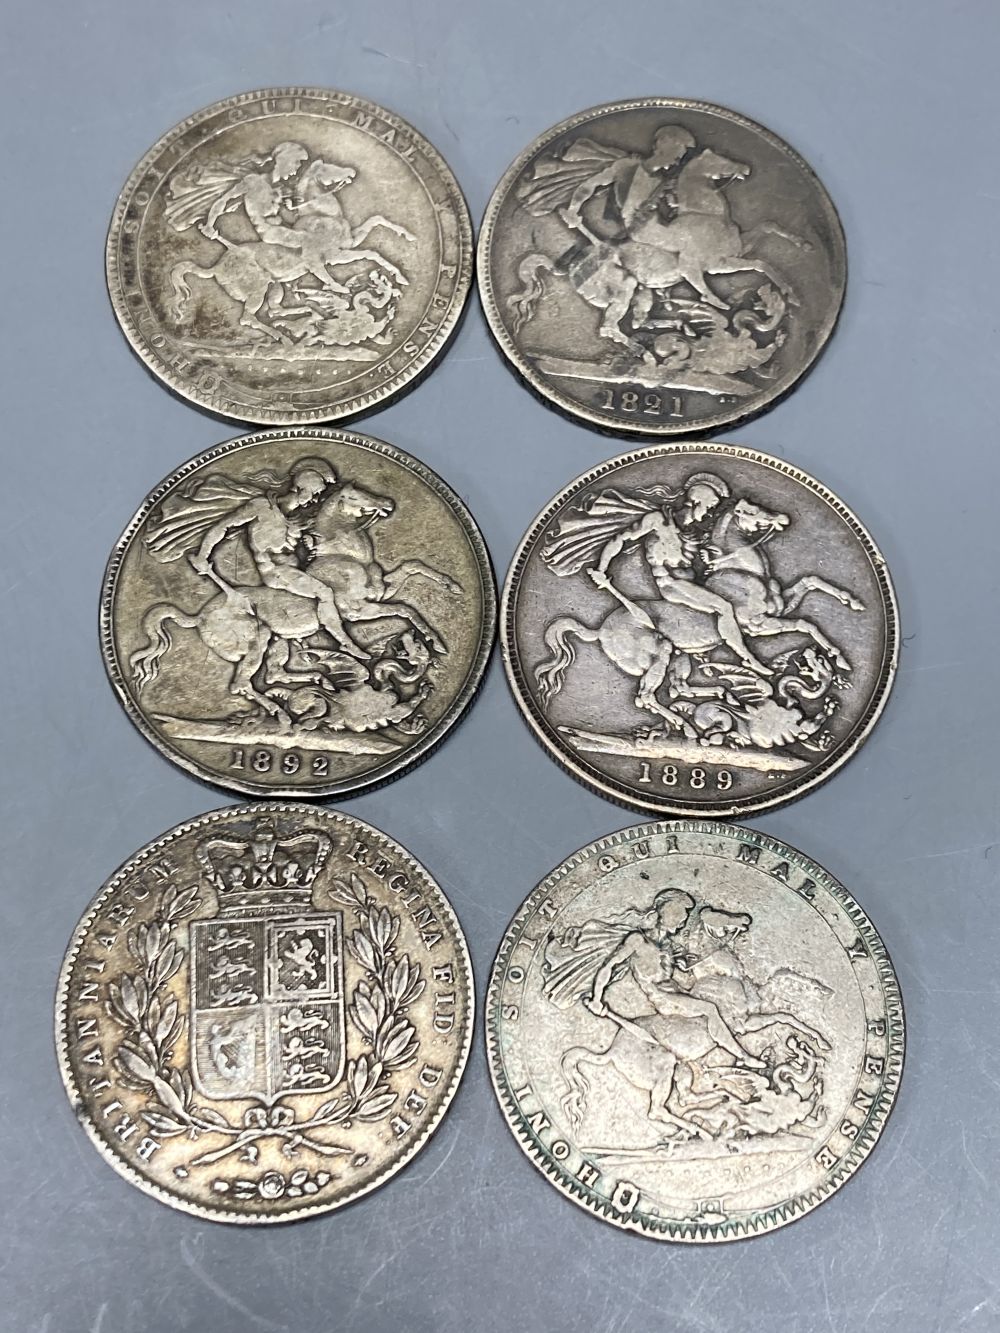 Great Britain, six silver crowns - 1820, VG, 1845, cinquefoil stops, F and 1821, 1845, 1889, 1892